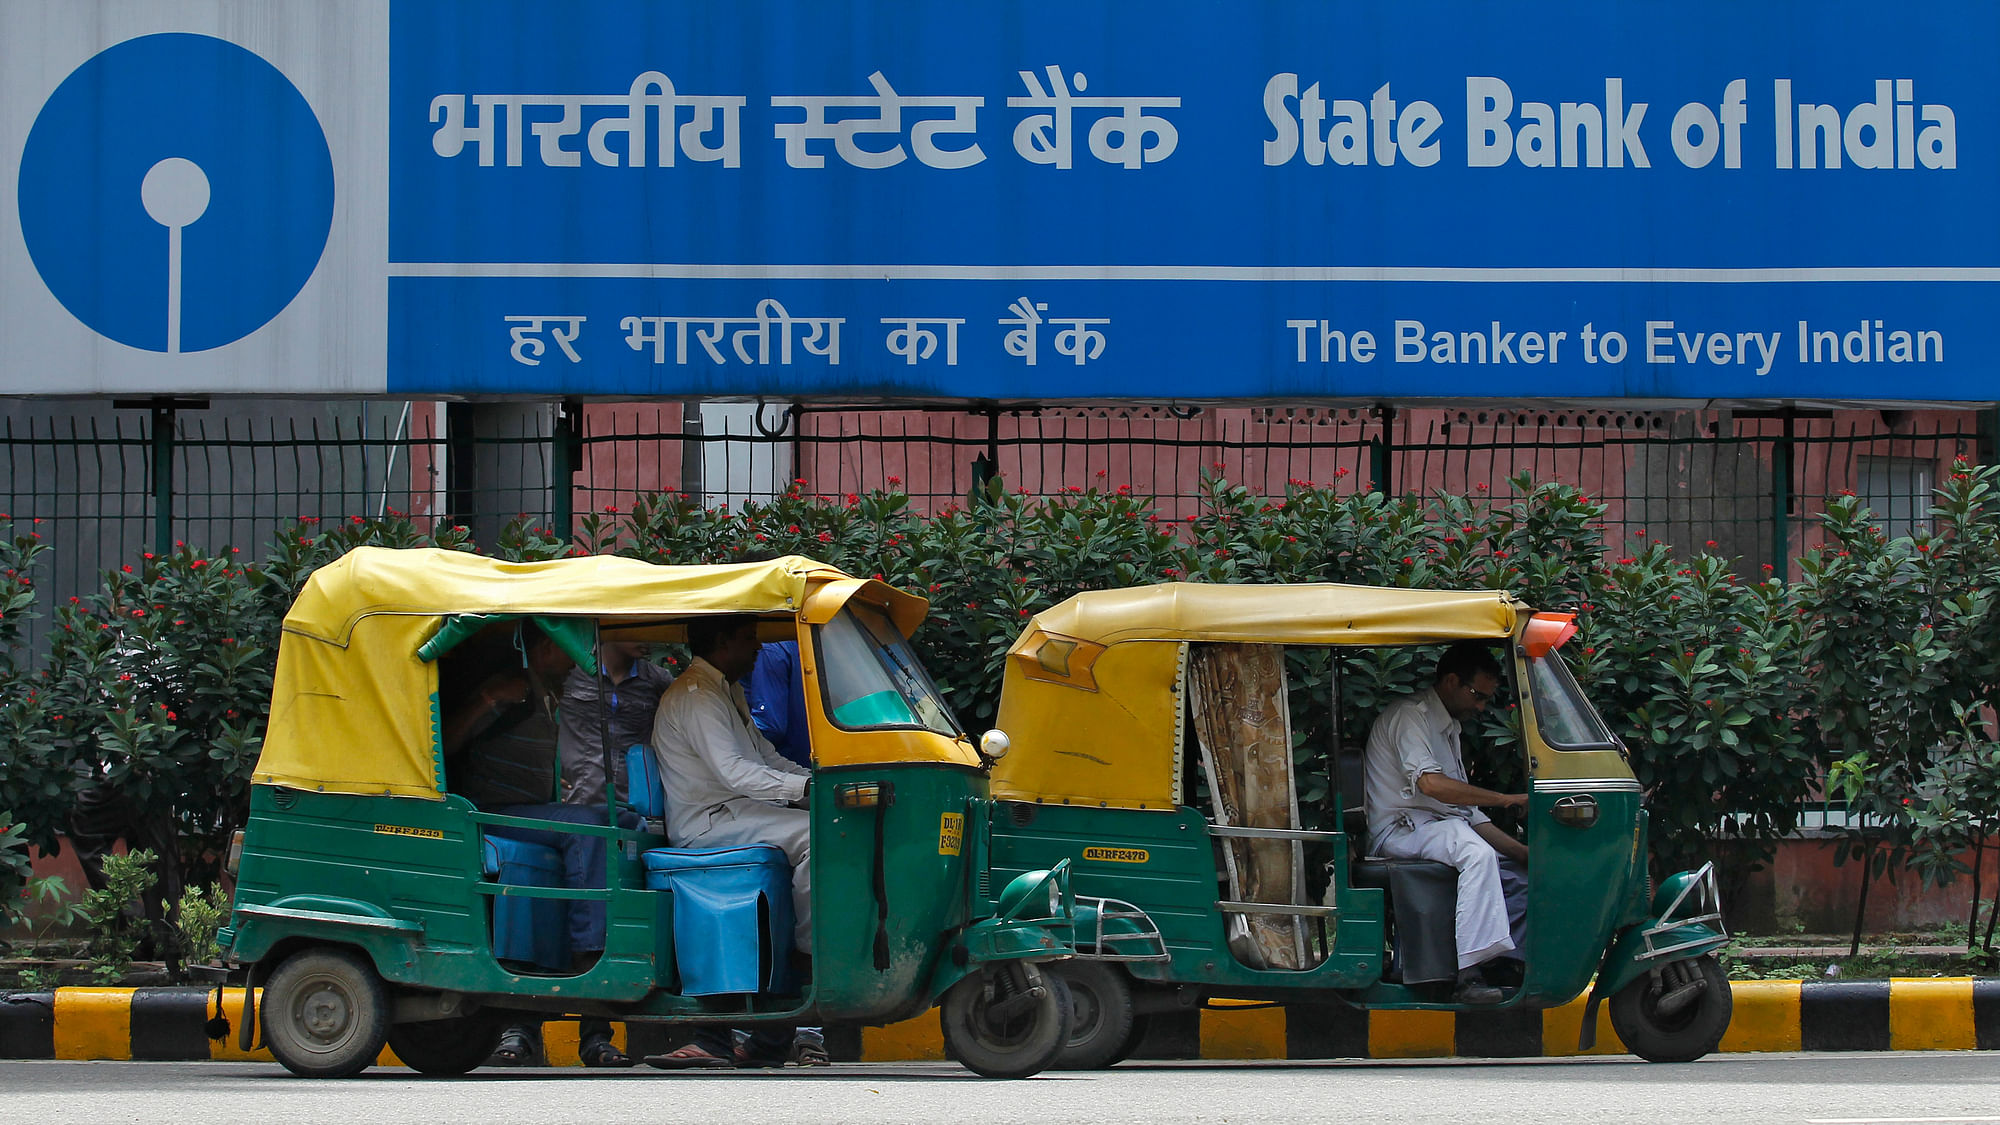 The head office of State Bank of India (SBI) in New Delhi. (Photo: Reuters)